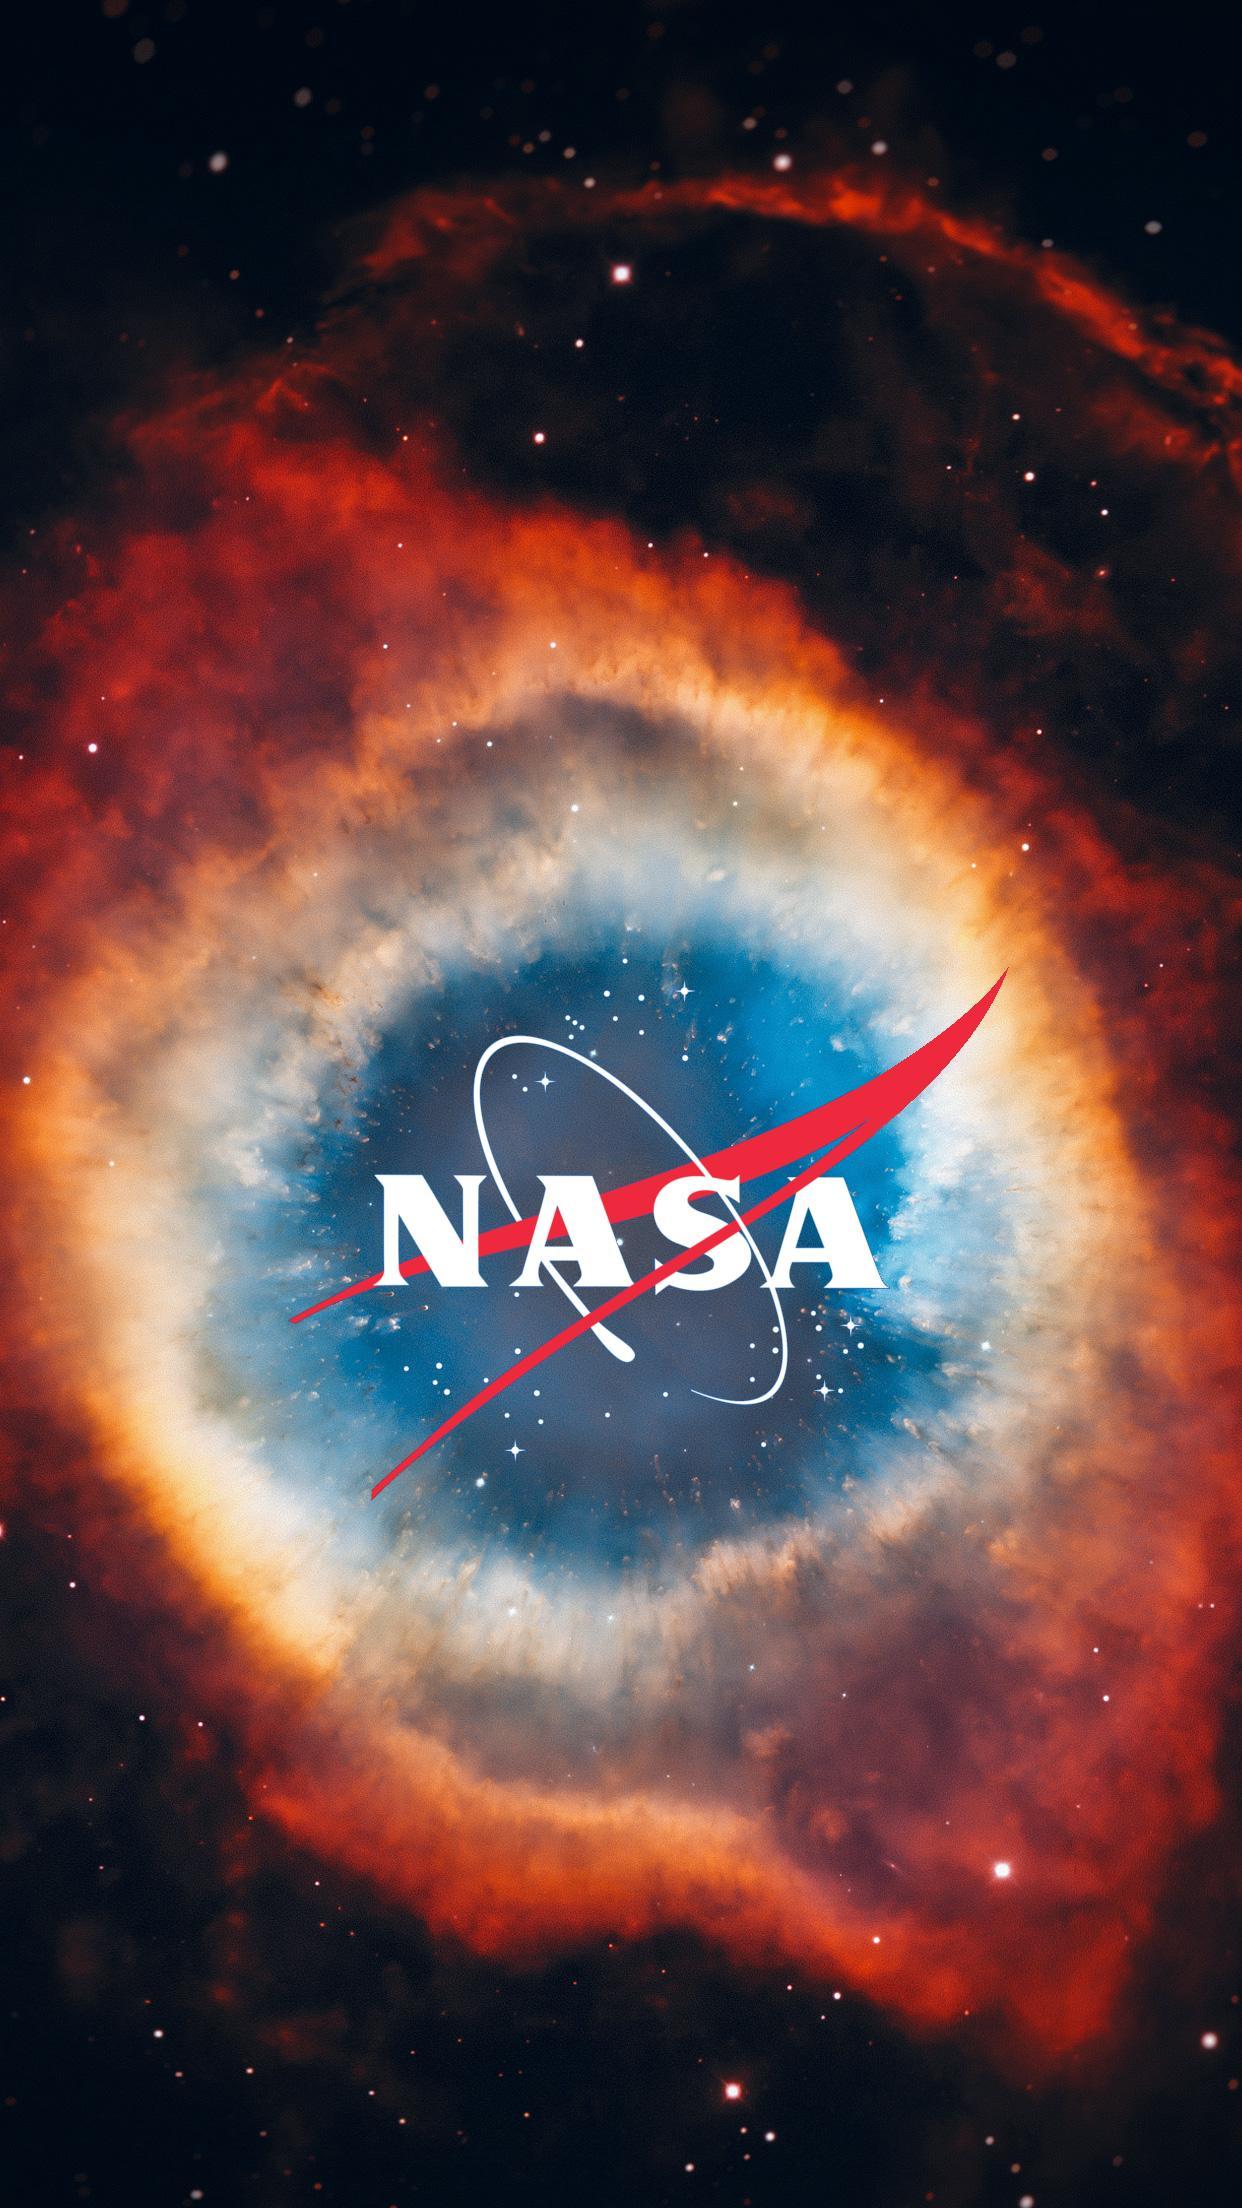 program that change wallpaper with nasa picture of the day